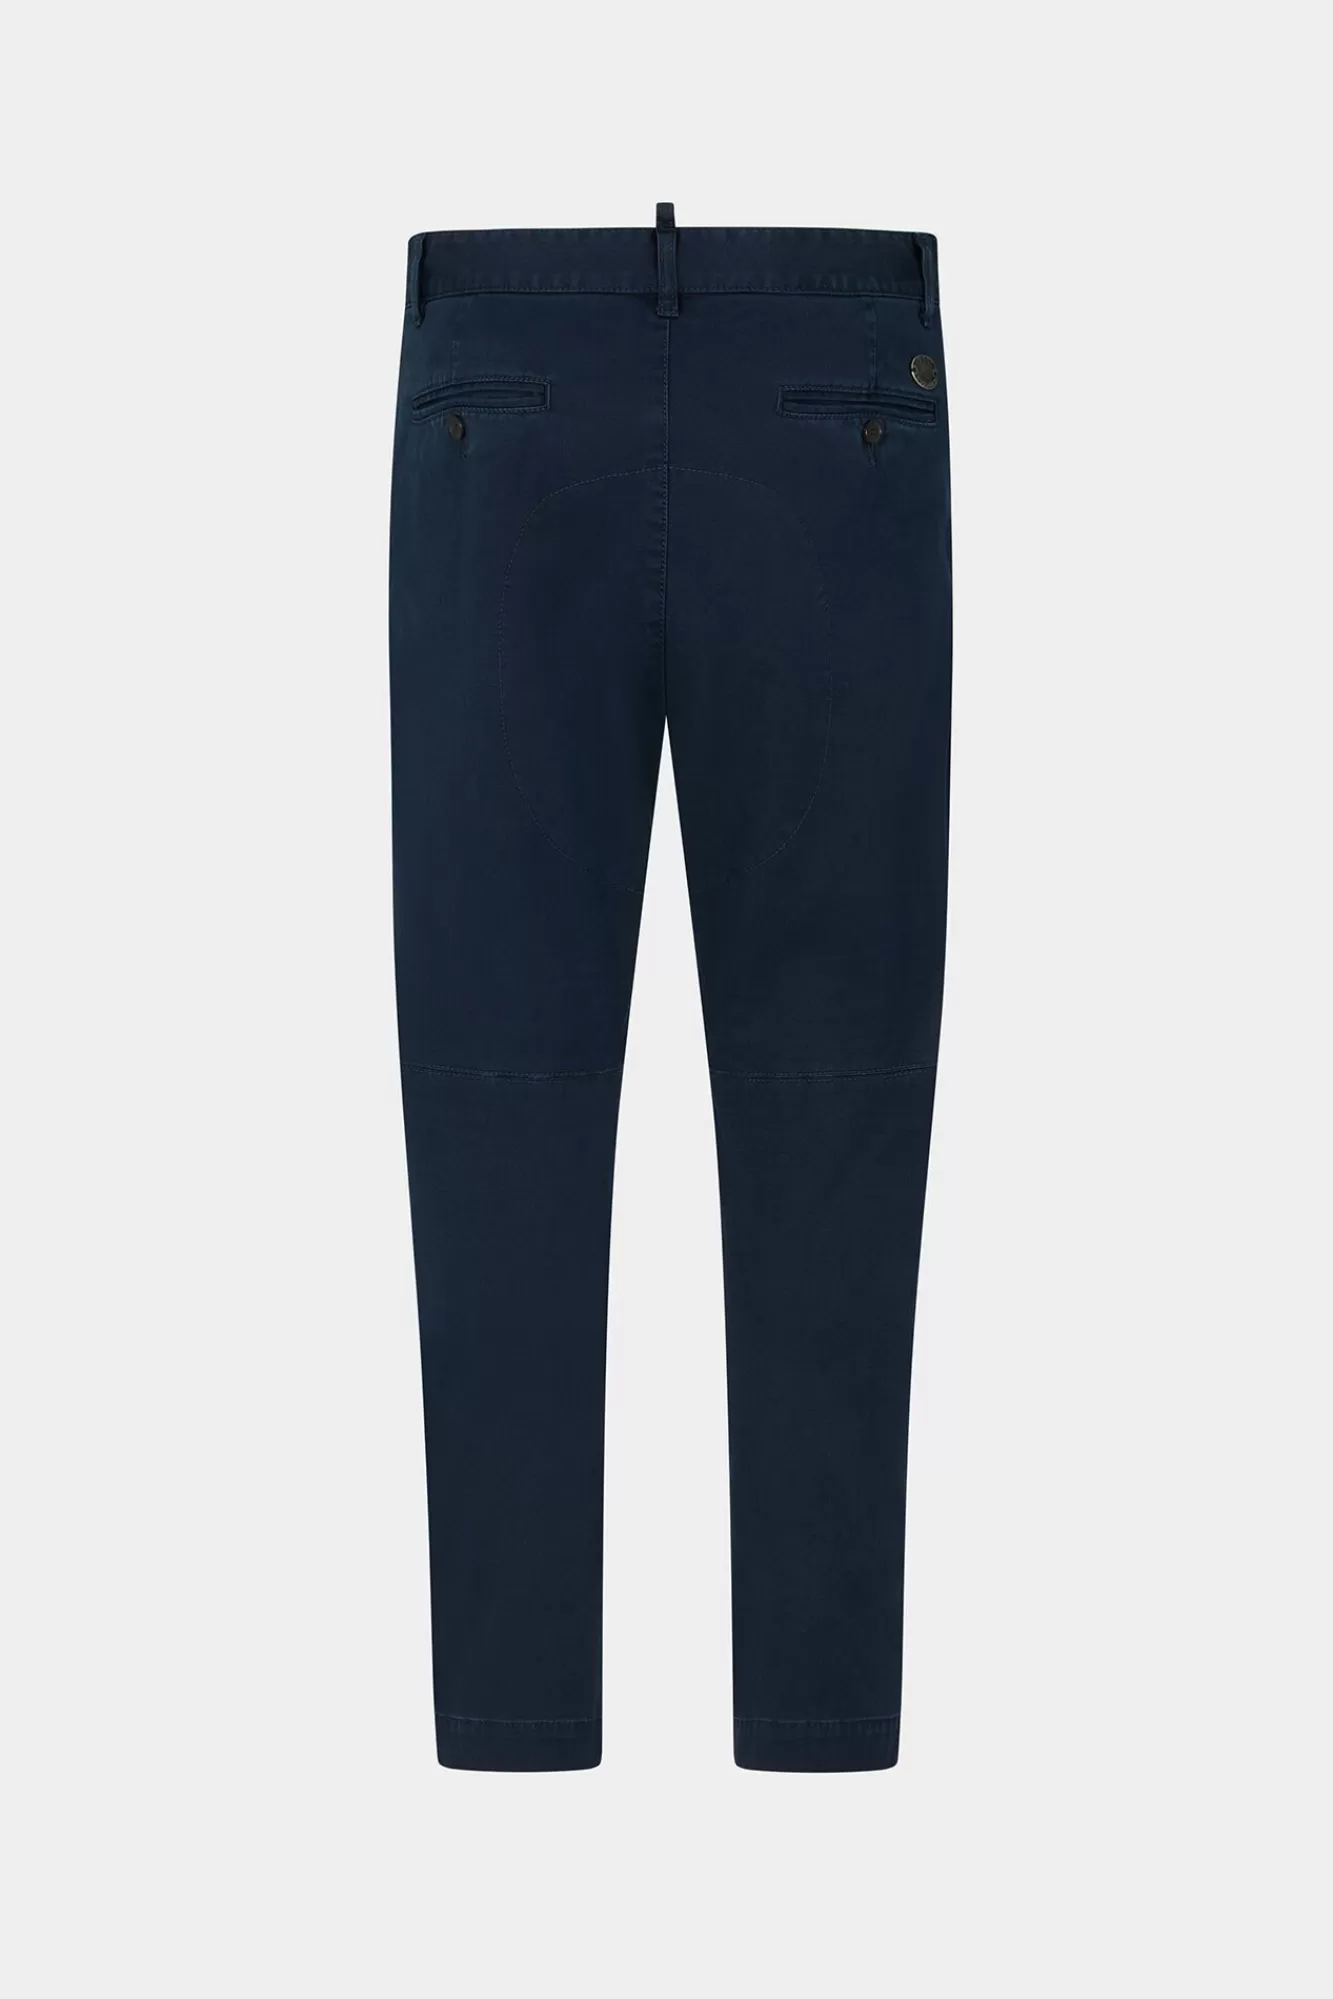 D2 Sexy Chino Pants<Dsquared2 New